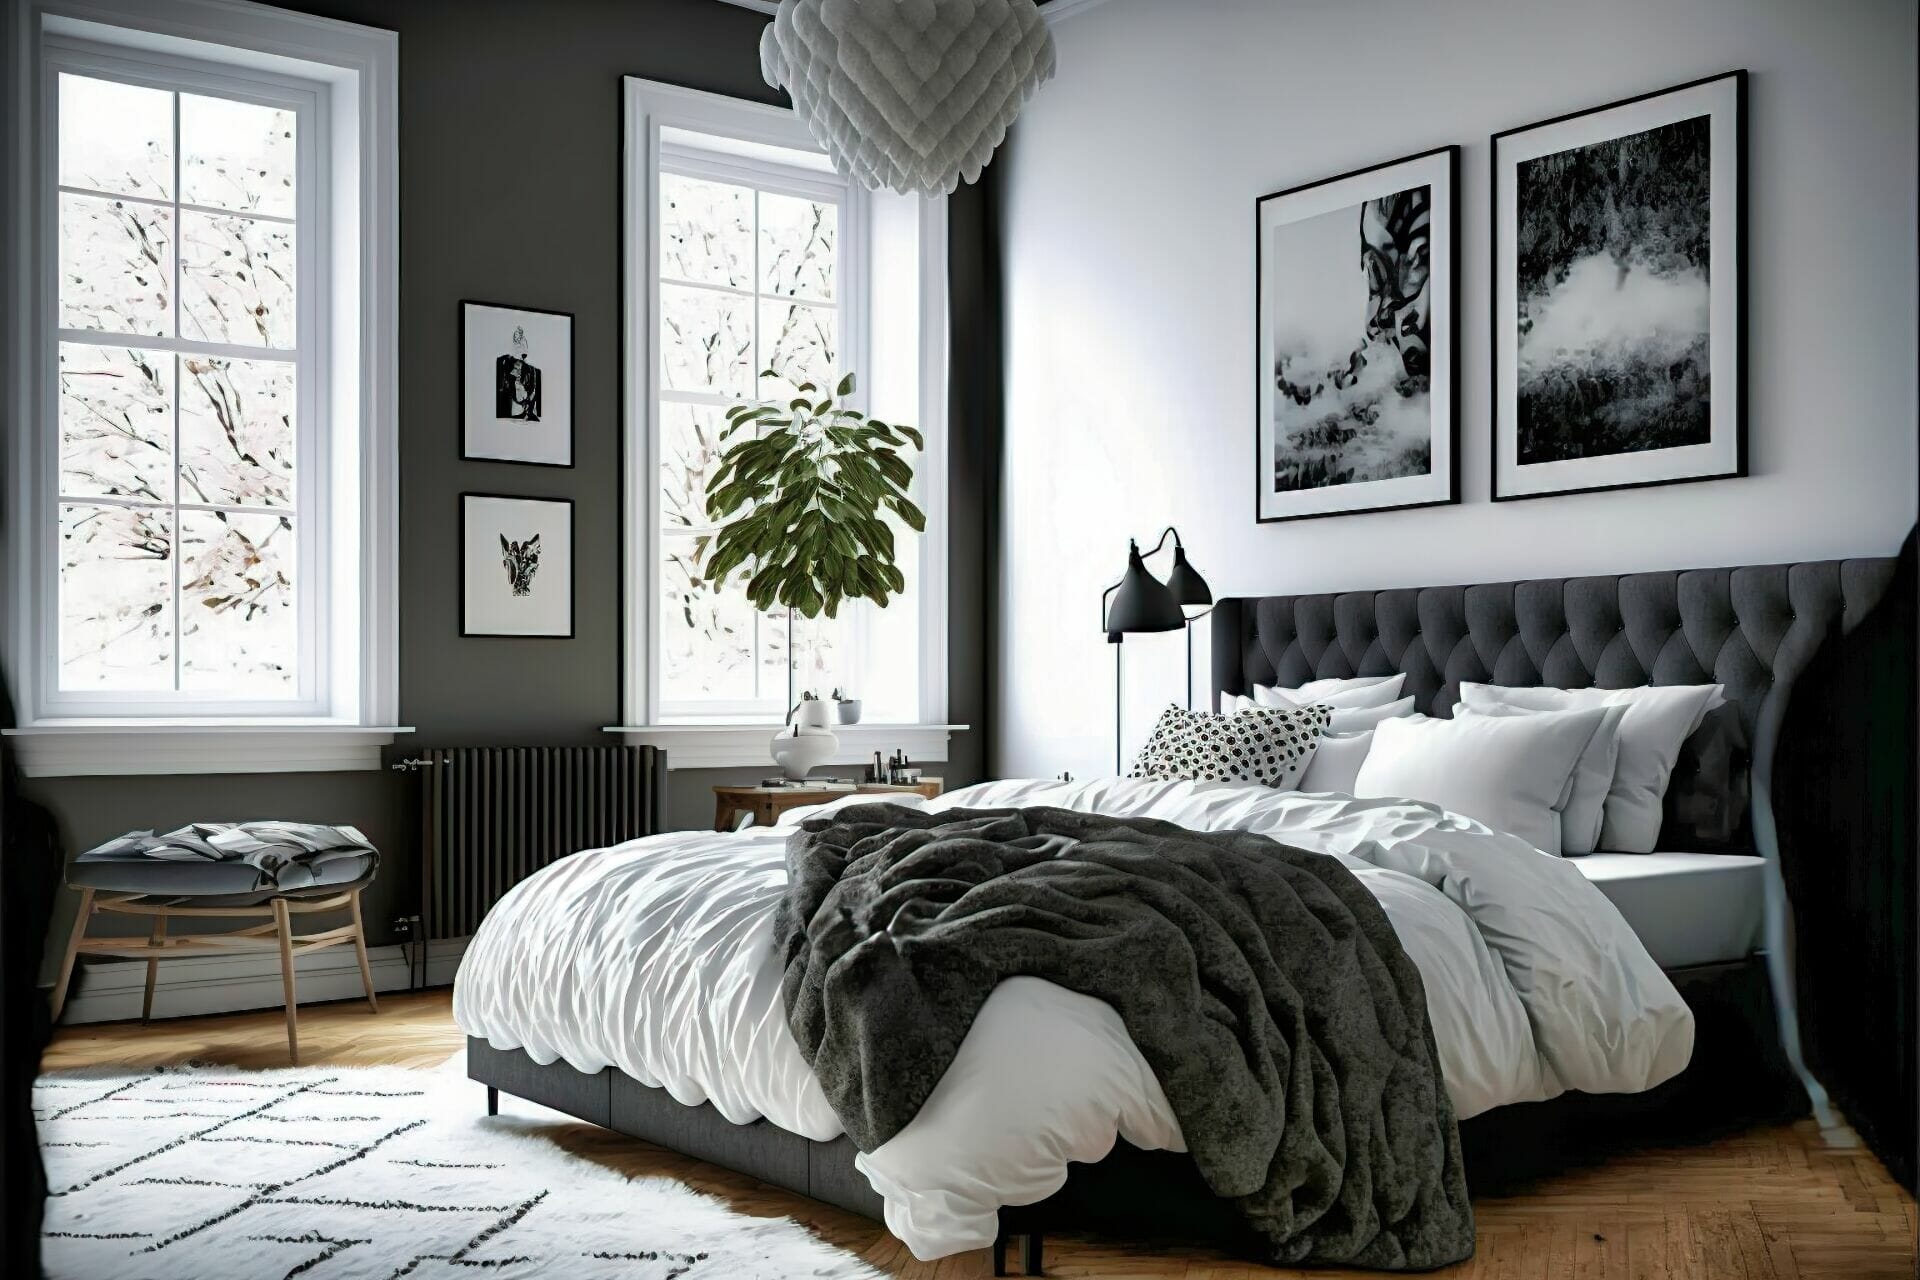 A Scandinavian Style Bedroom With Elegant Black And White Touches - This Sophisticated Bedroom Features A Black And White Color Palette, With Dark Wood Floors And White Walls. A Tufted Headboard And Matching Bed Frame Are Accented With A Cozy Fur Throw, While A Geometric Area Rug And Black And White Art Prints Add A Touch Of Drama.